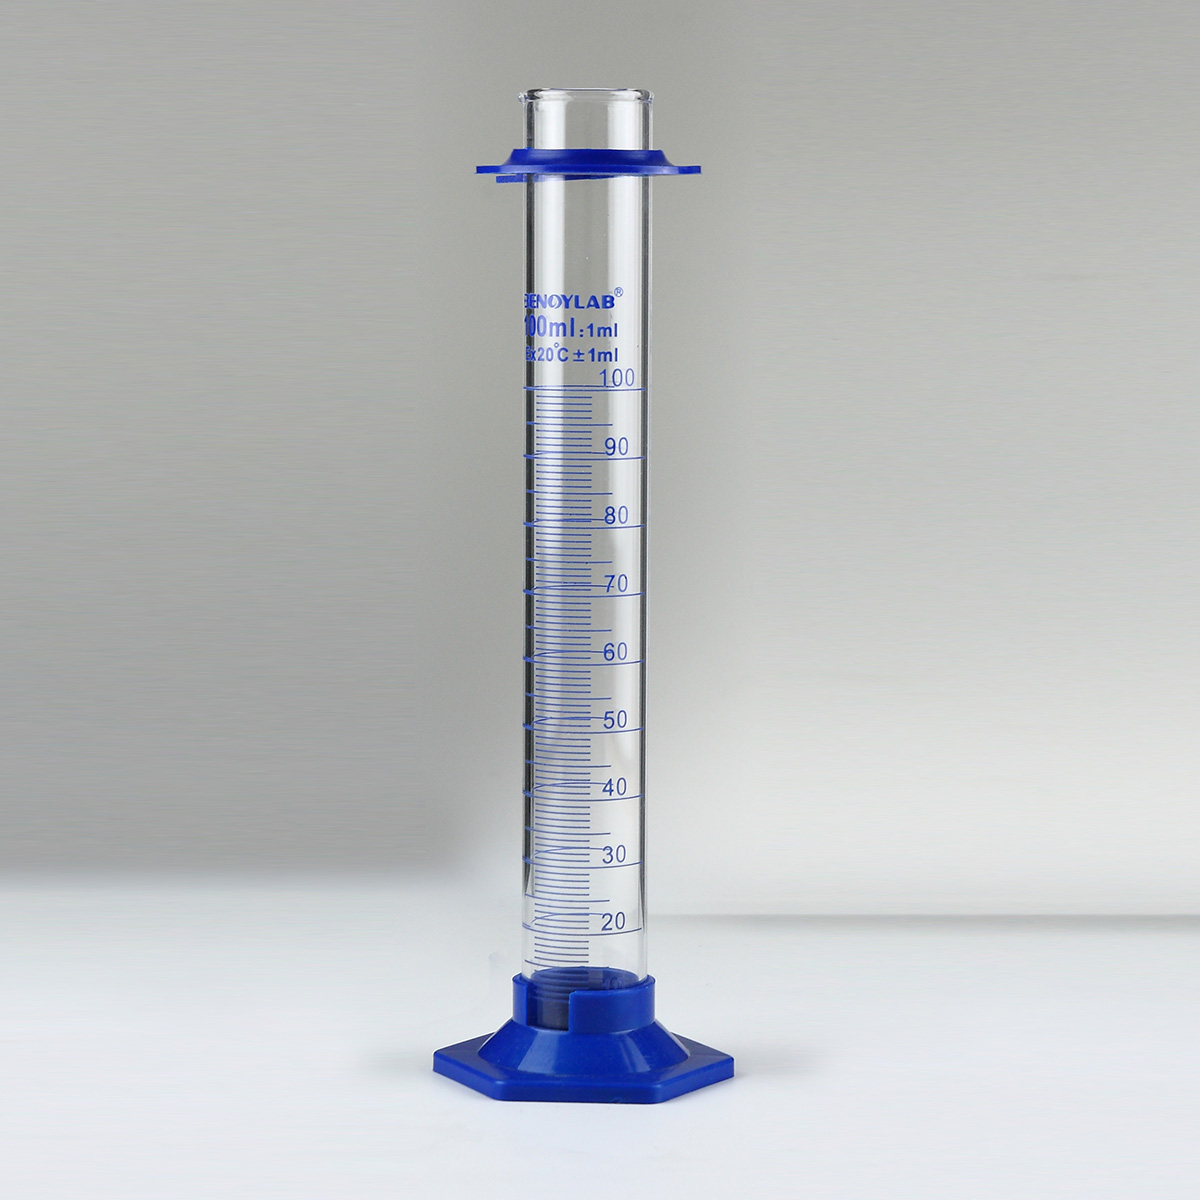 Measuring Cylinder With Spout And Glass Plastic Hexagonal Ba